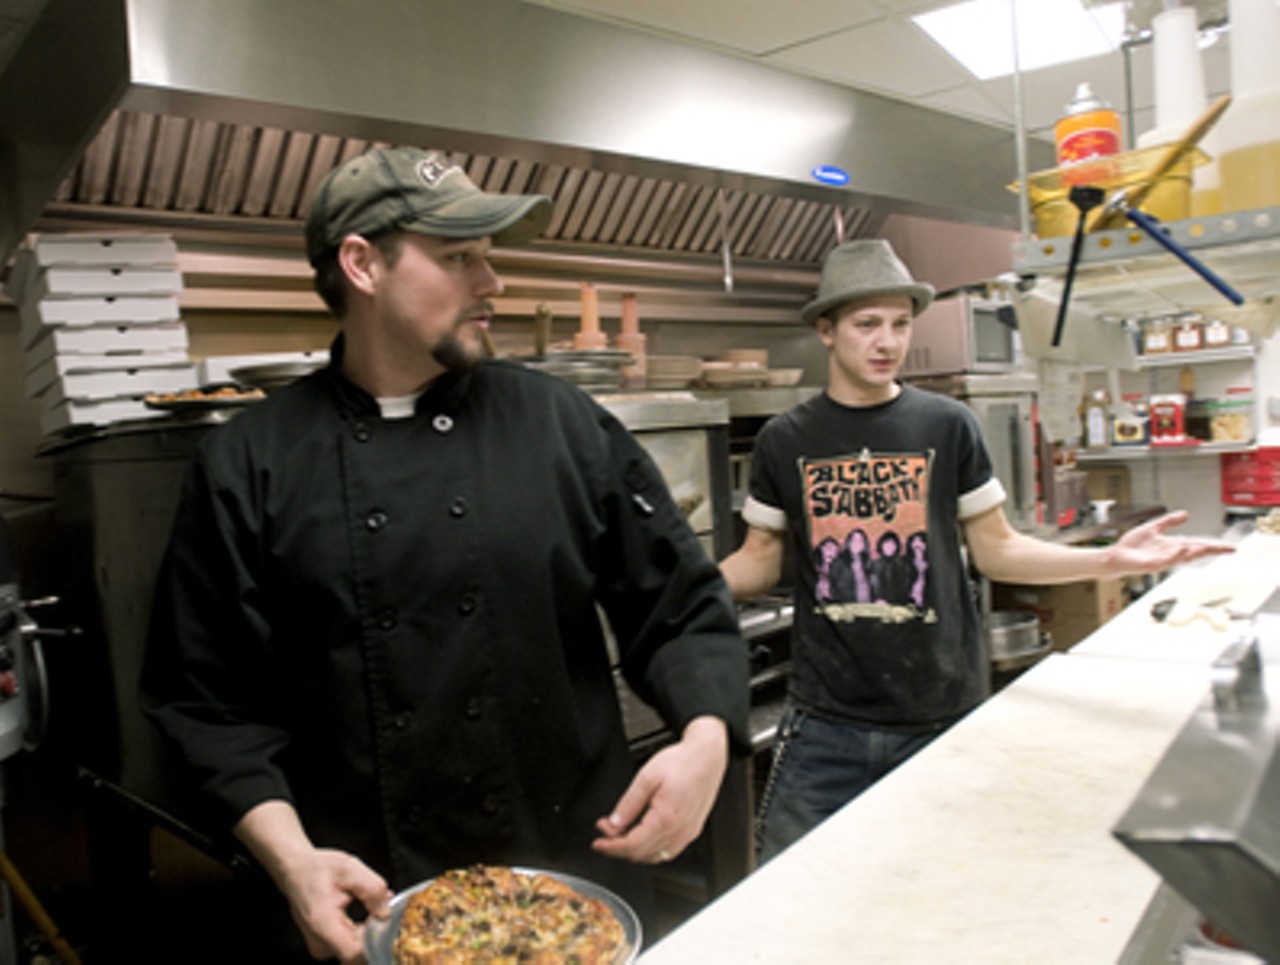 Executive Chef Steve Lafata (left) and lead line cook Matthew Reyland (right) keepin&rsquo; it real in the kitchen.Read Delta Force: The Wedge is a tavern, through and through &mdash; but the pizzas take bar food to another level.